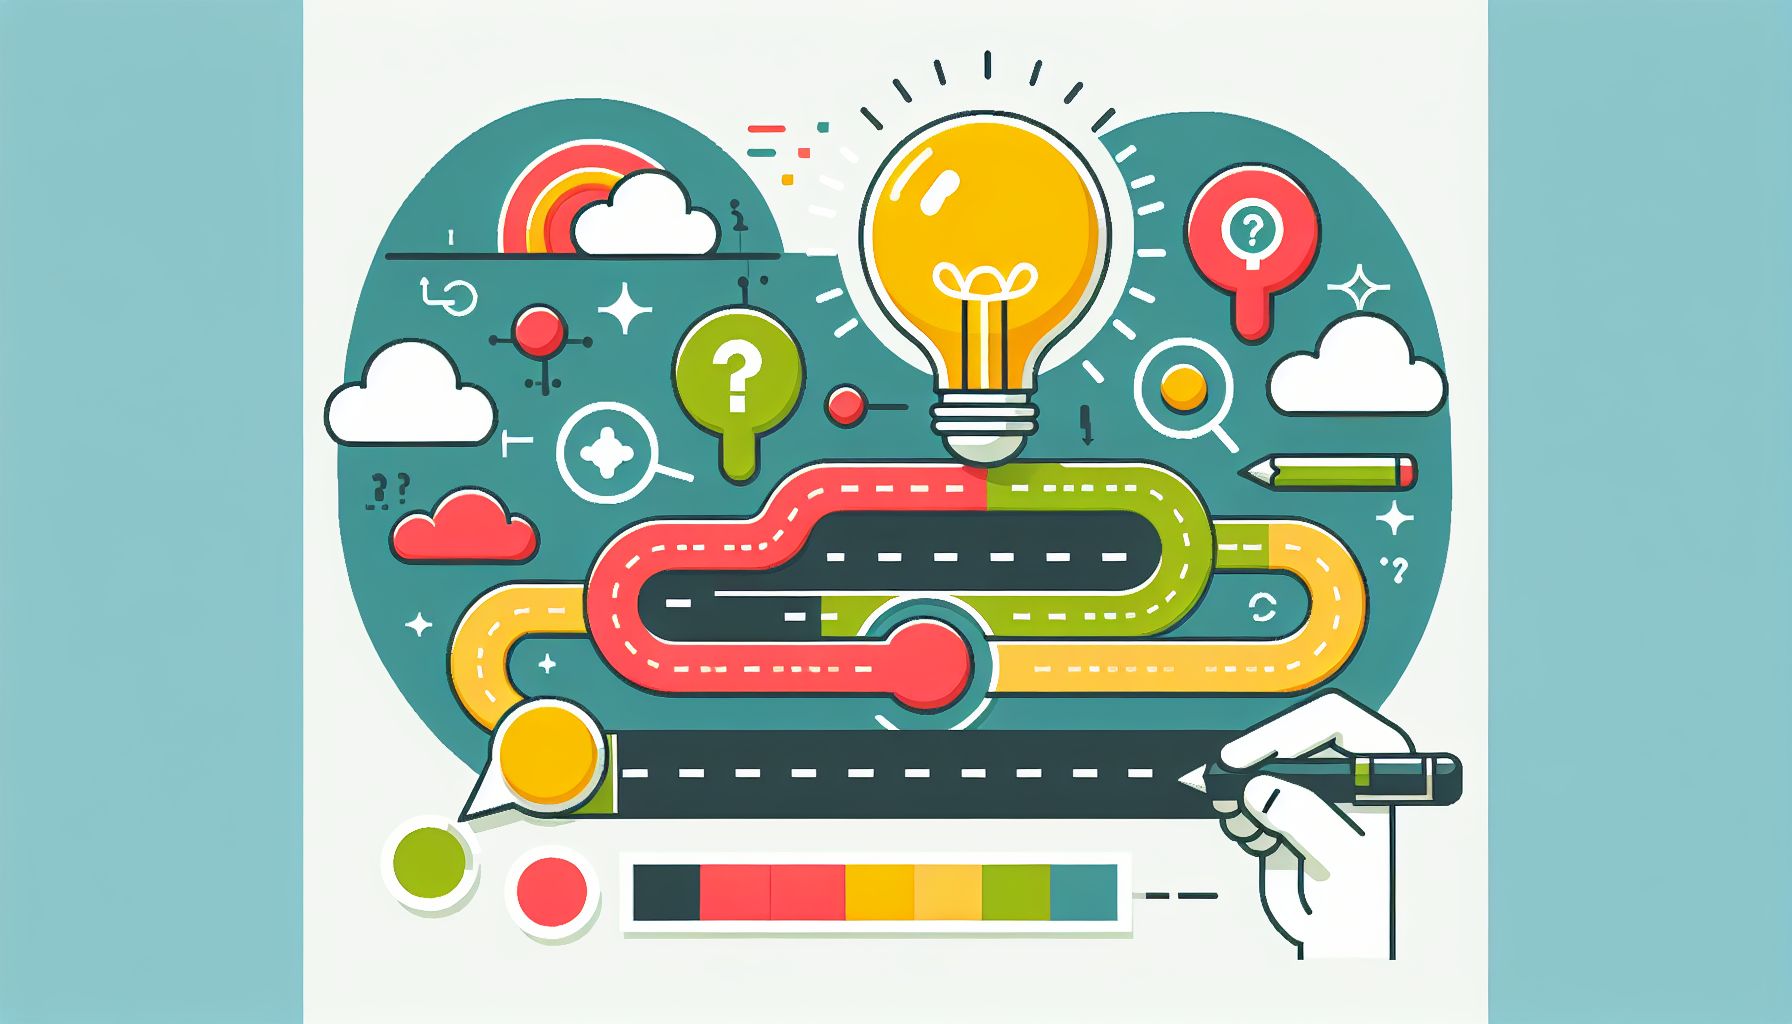 What is idea management roadmap? in flat illustration style and white background, red #f47574, green #88c7a8, yellow #fcc44b, and blue #645bc8 colors.